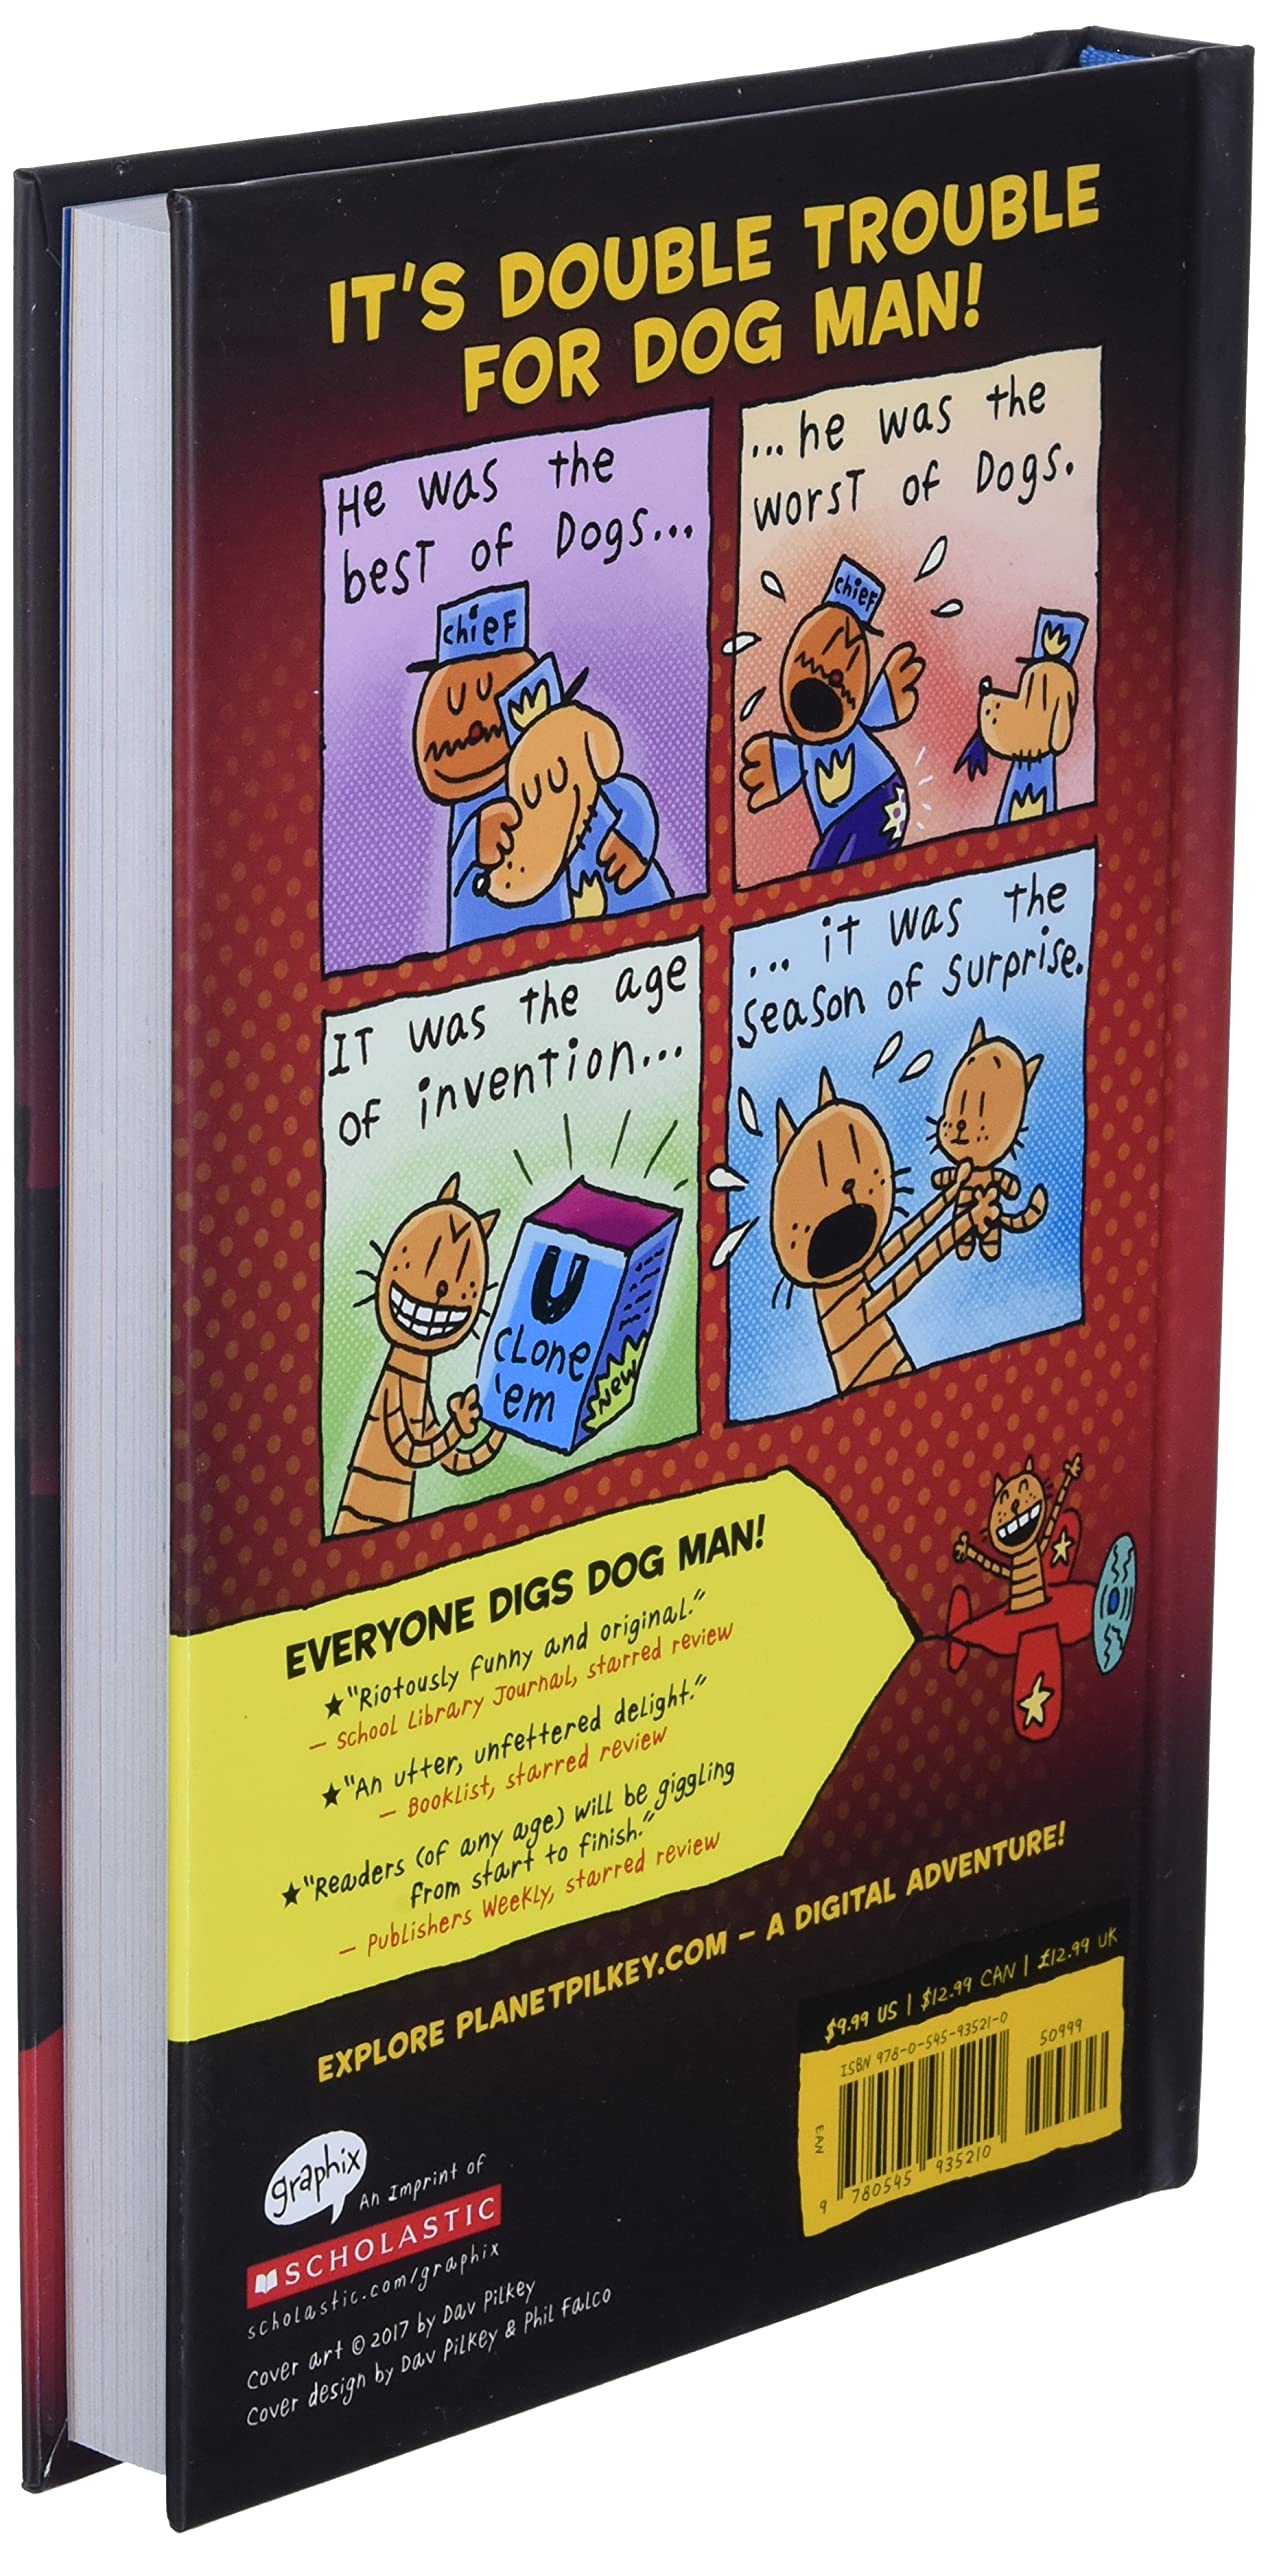 Dog Man: A Tale of Two Kitties: From the Creator of Captain Underpants (Dog Man #3)